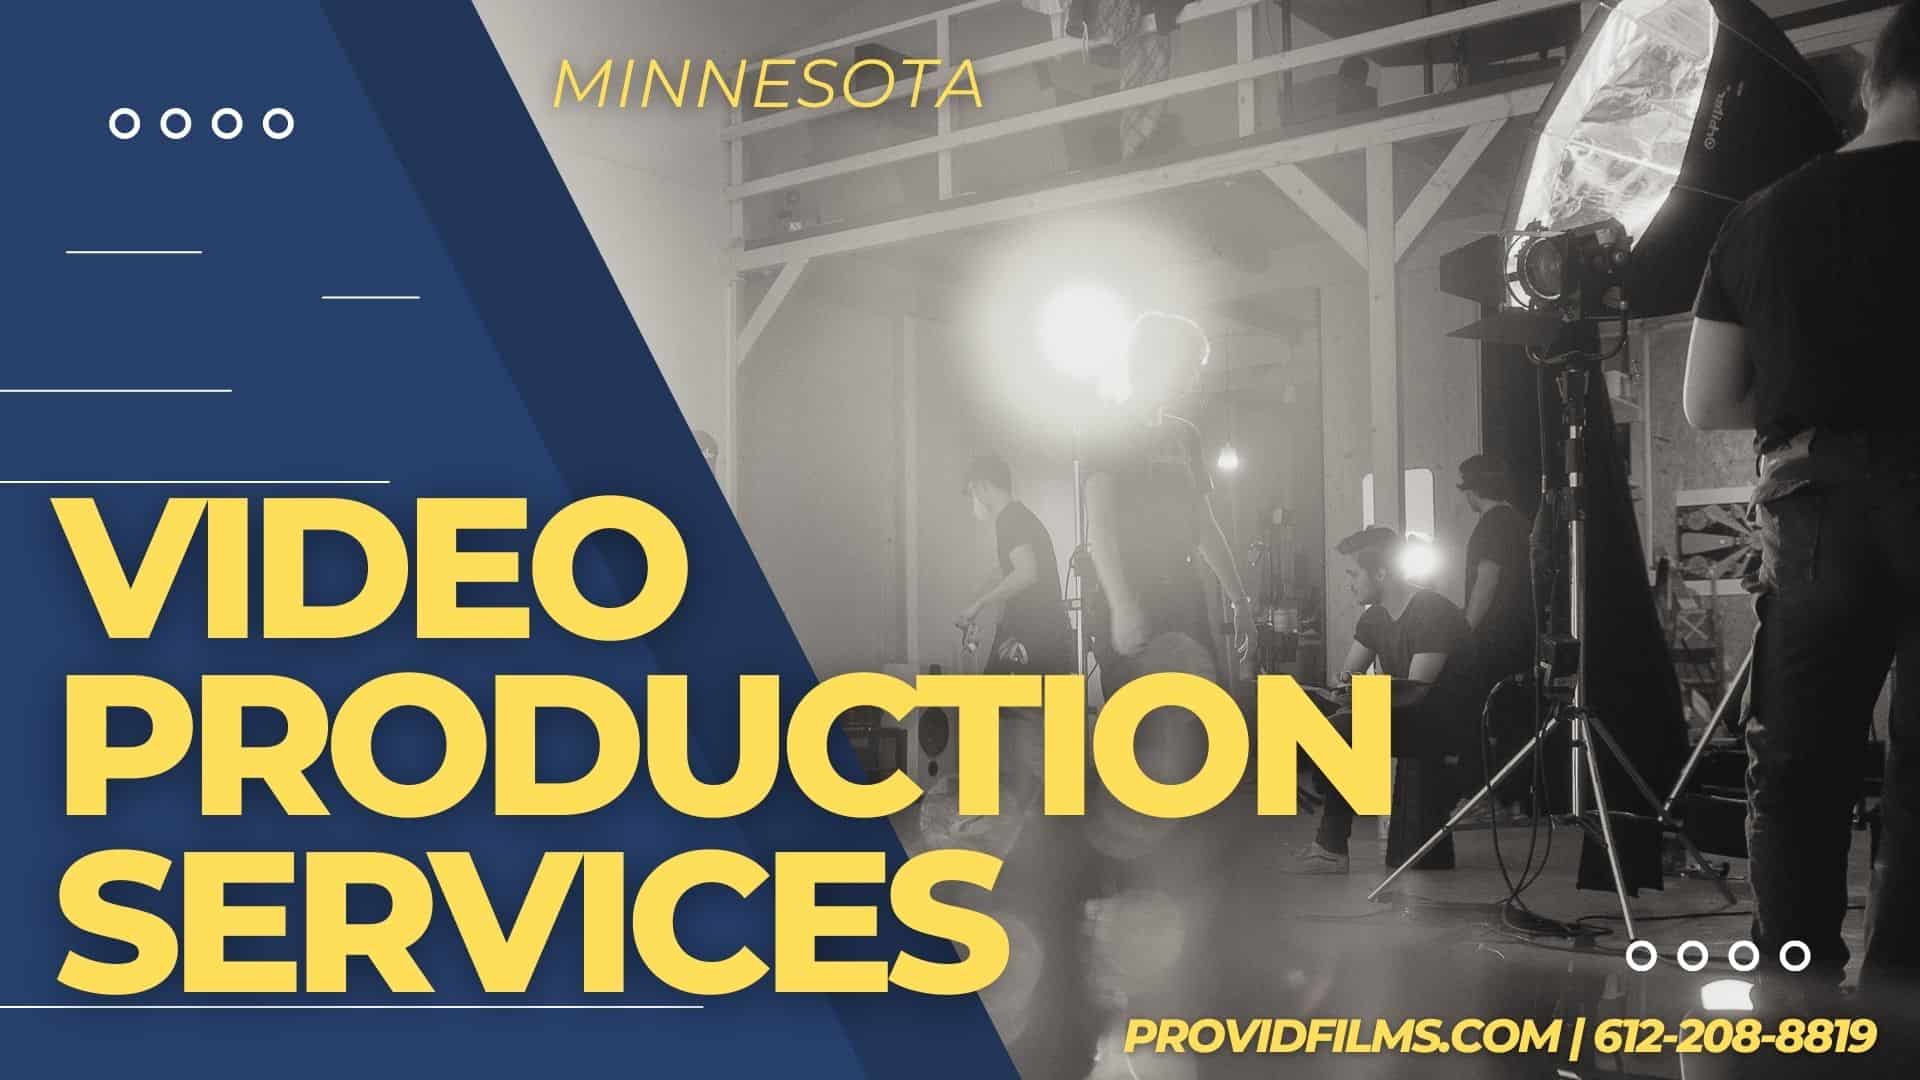 Graphic of a Video Production Studio with the text saying "Video Production Services"